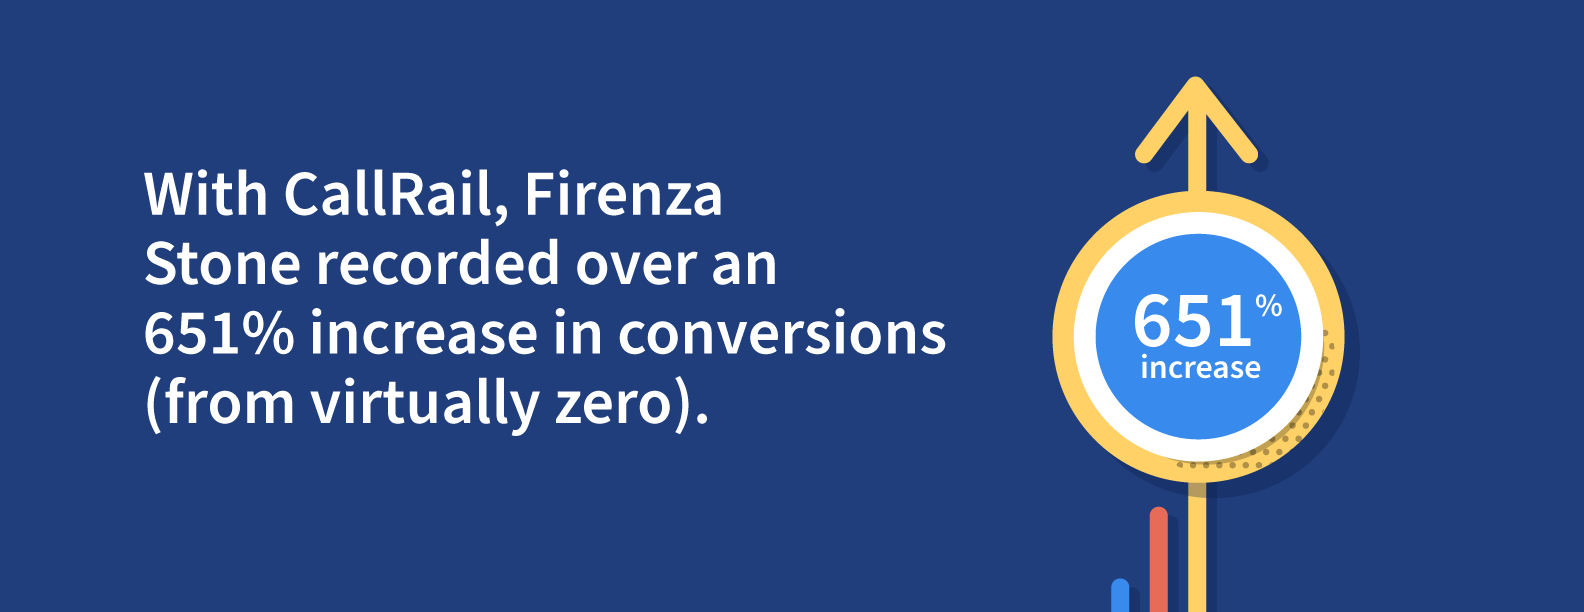 With CallRail, Firenza Stone recorded over an 651- increase in conversions (from virtually zero).